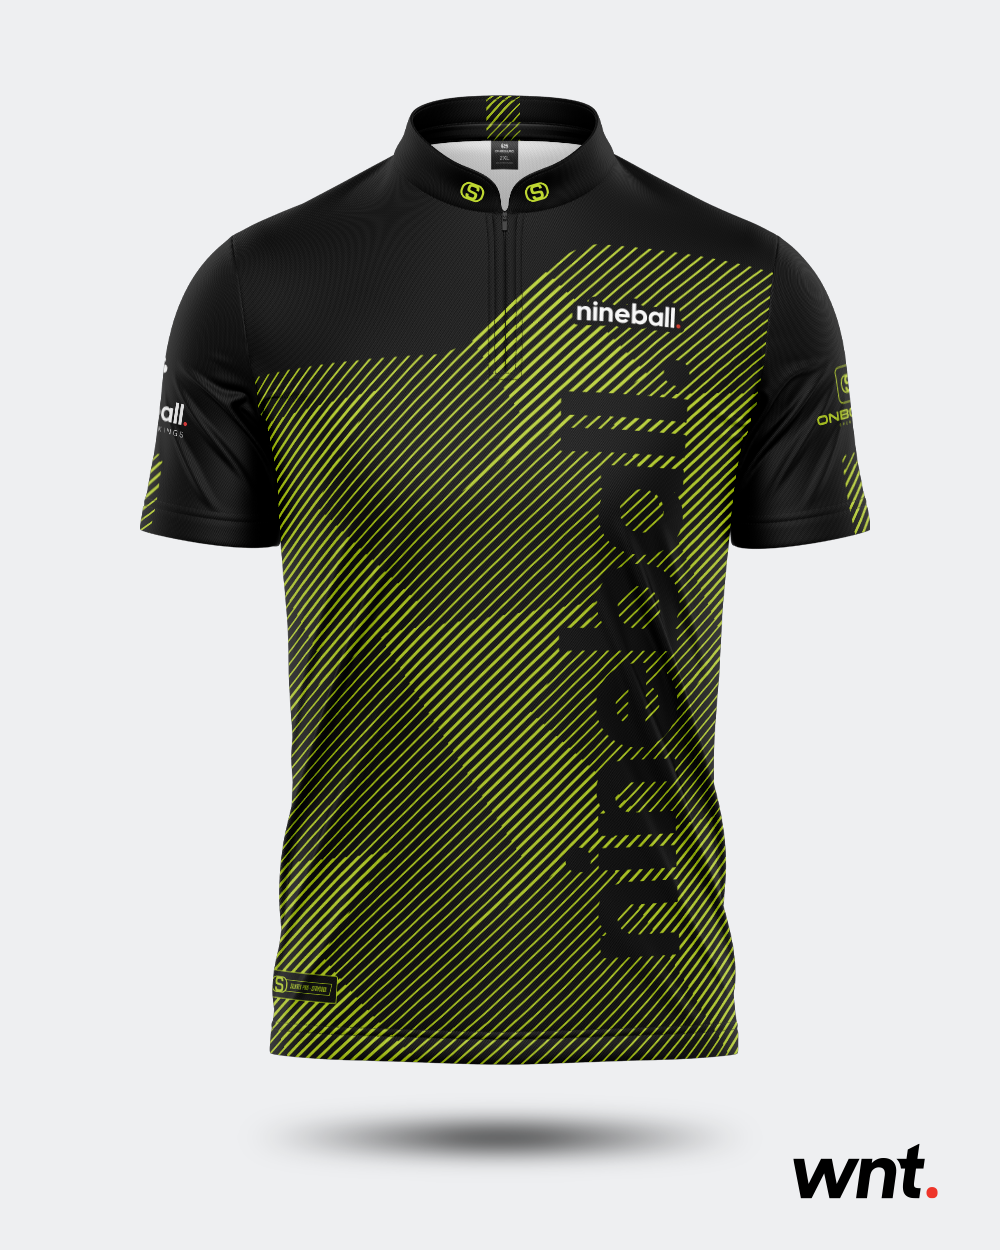 Essential Nineball Jersey - Lime